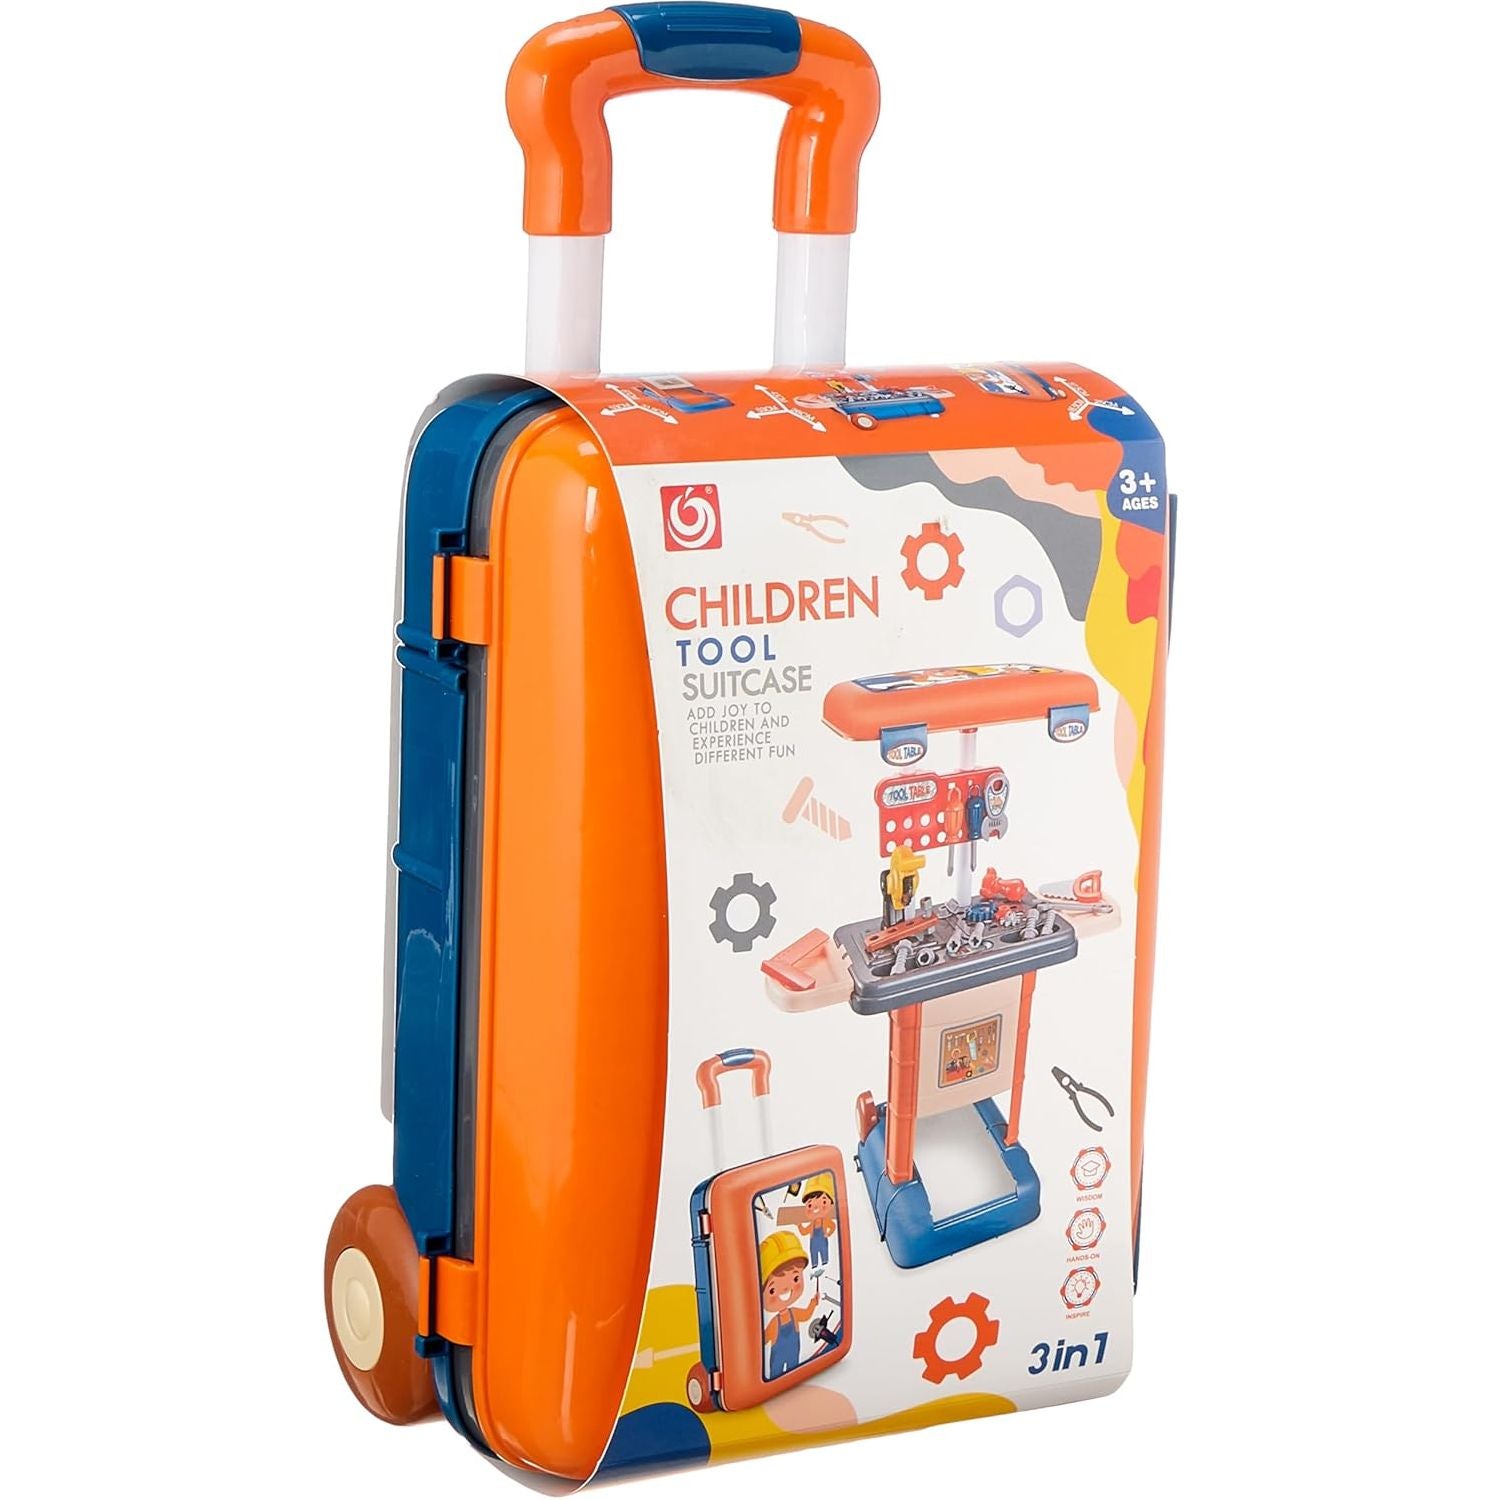 3 IN 1 Tool Suitcase children tools +3 - 009-013A